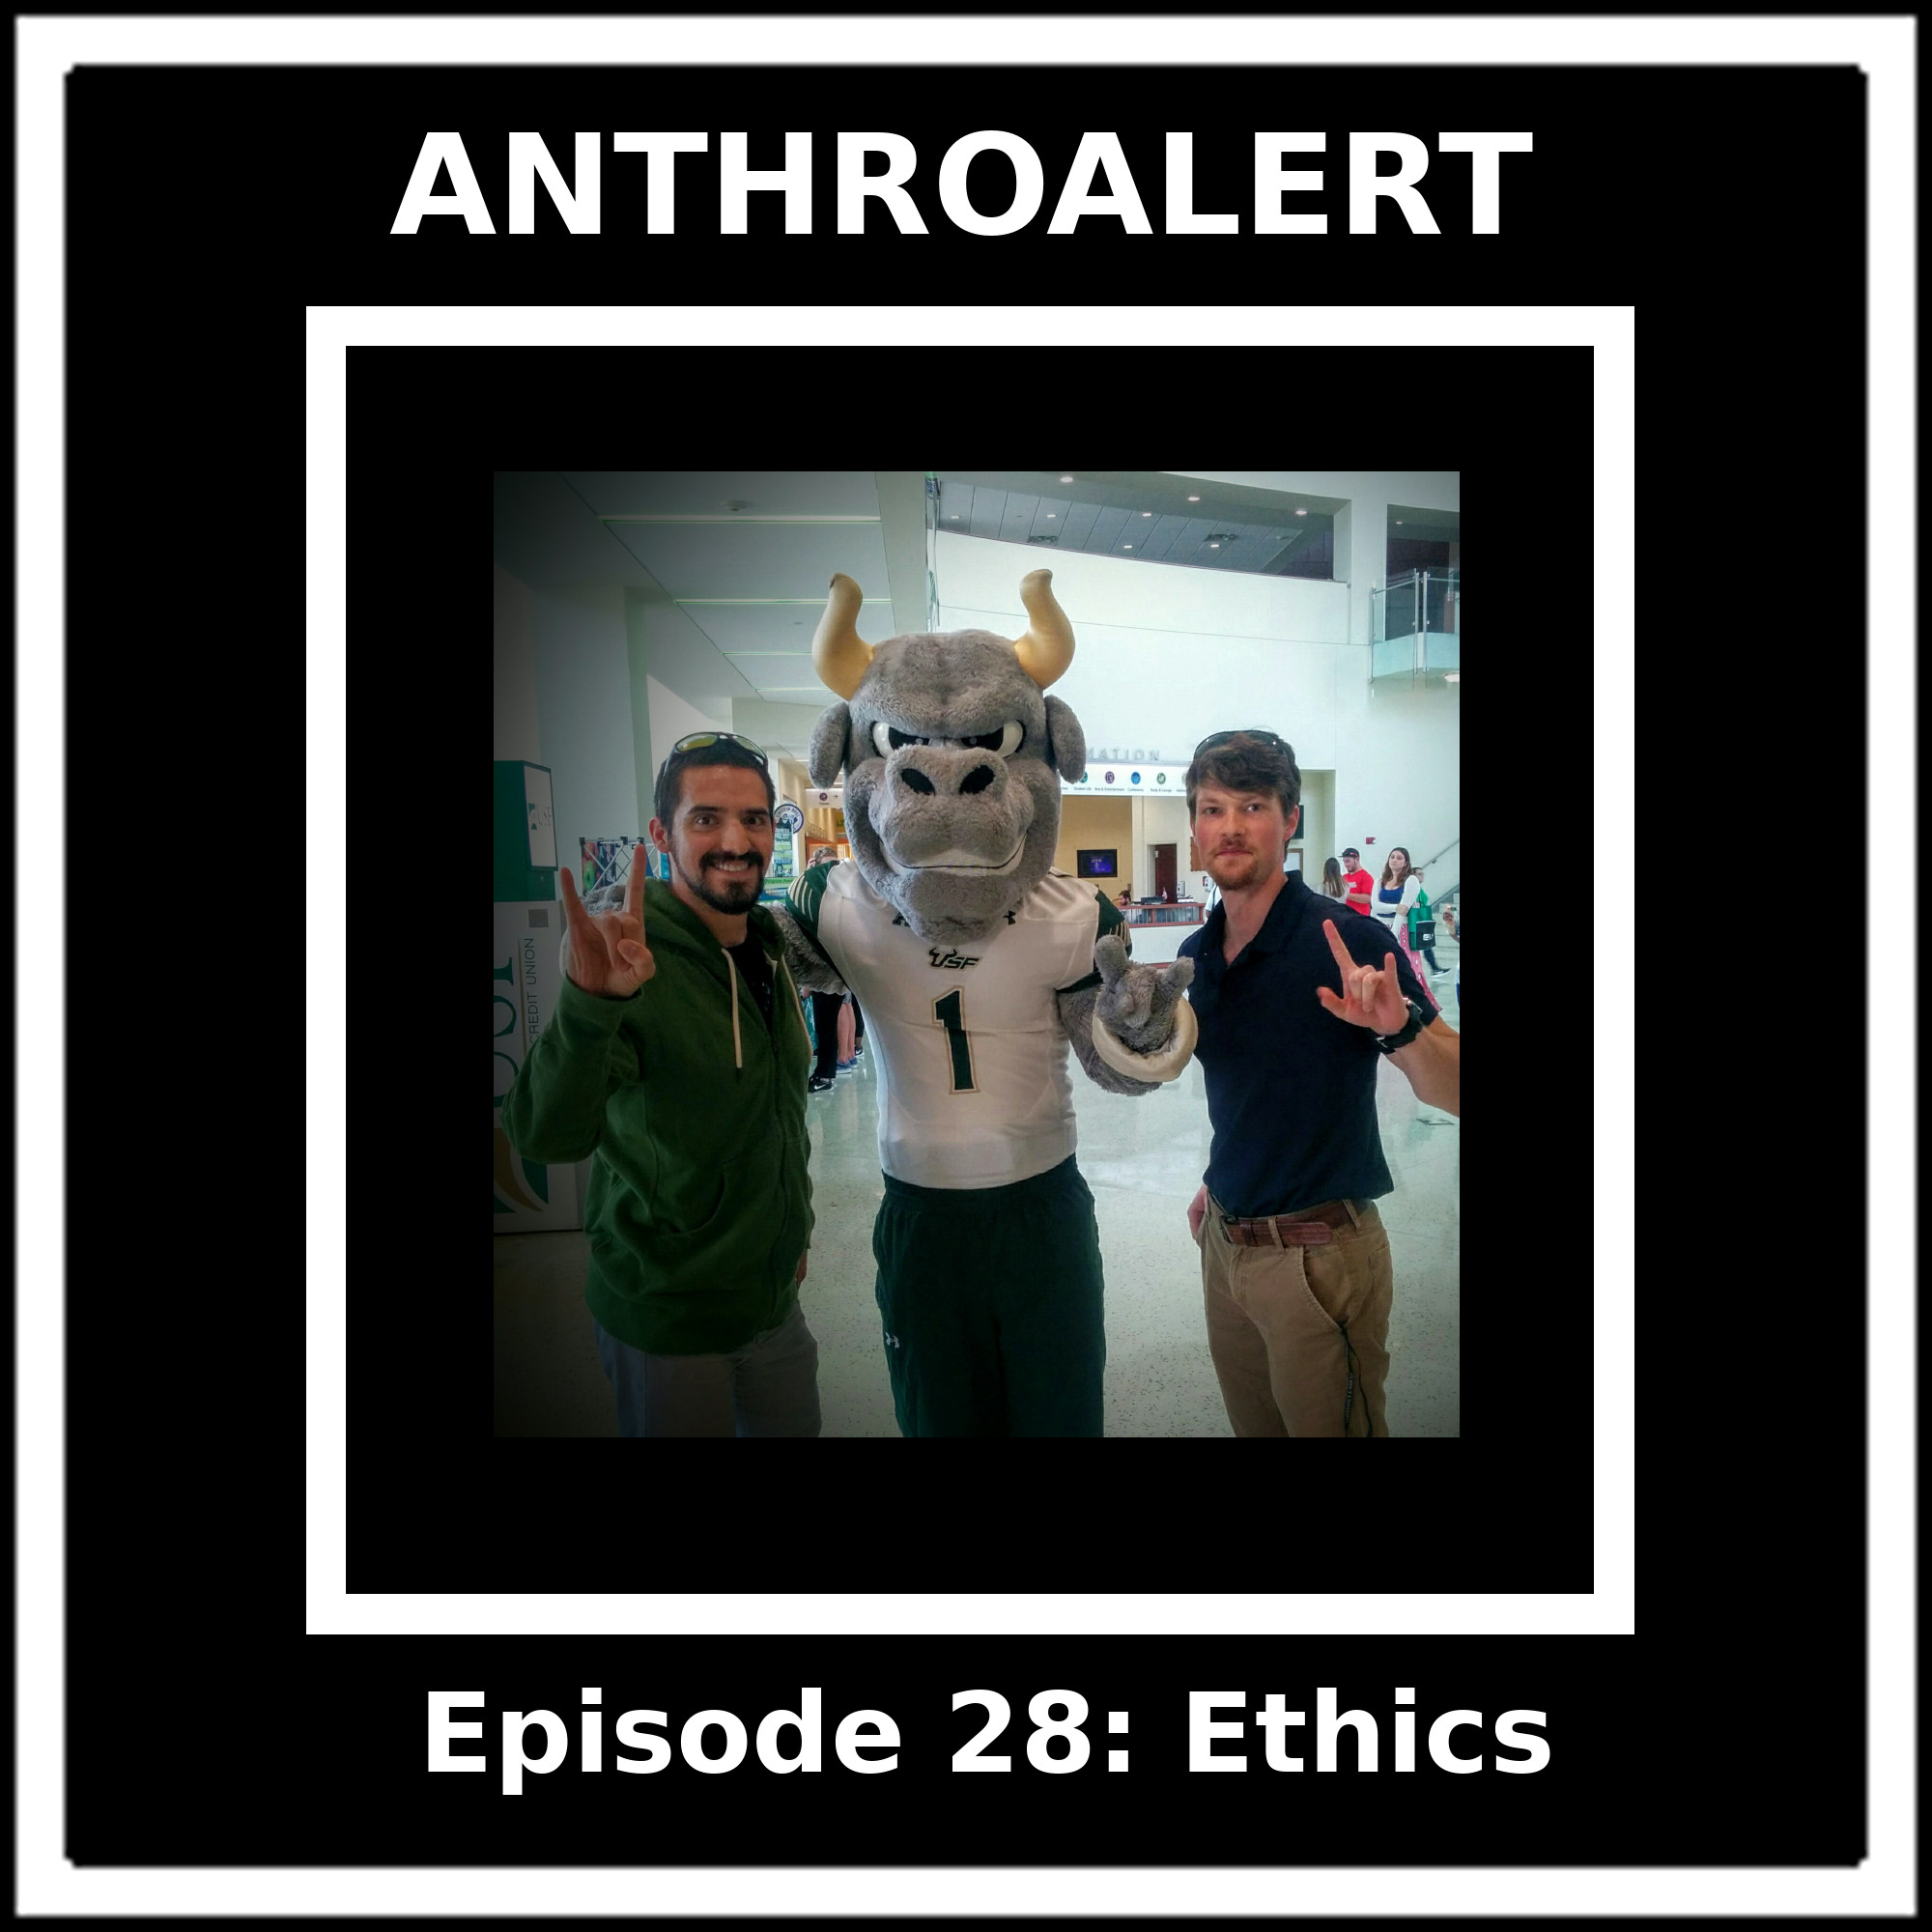 Episode 28: Anthropology and Ethics